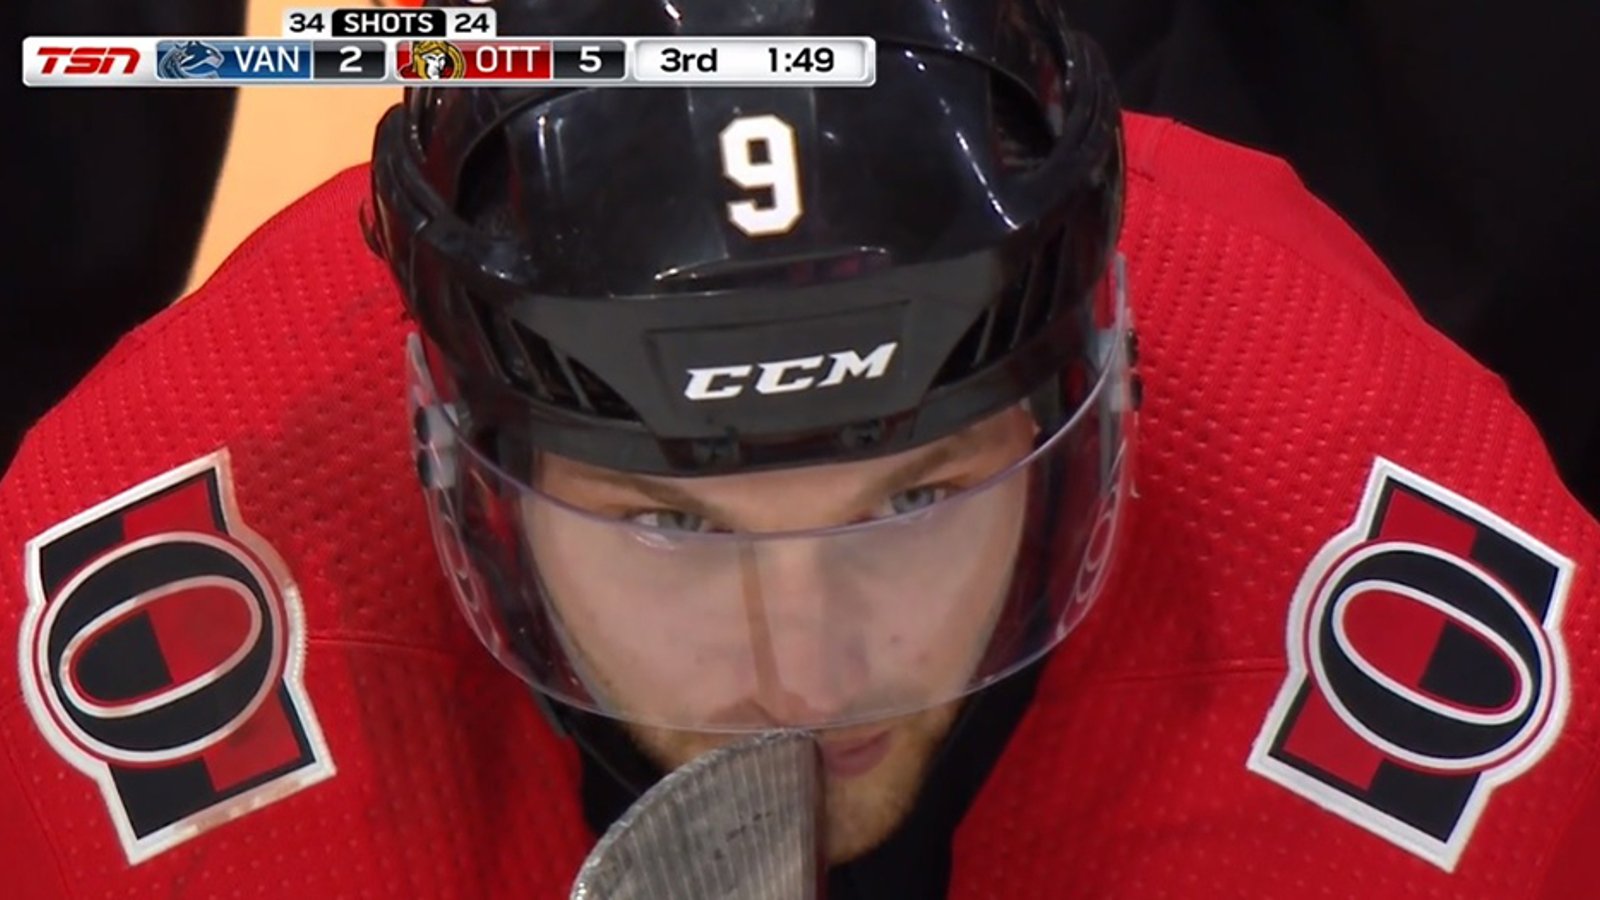 Bobby Ryan tears up on the bench as Sens fans chant his name